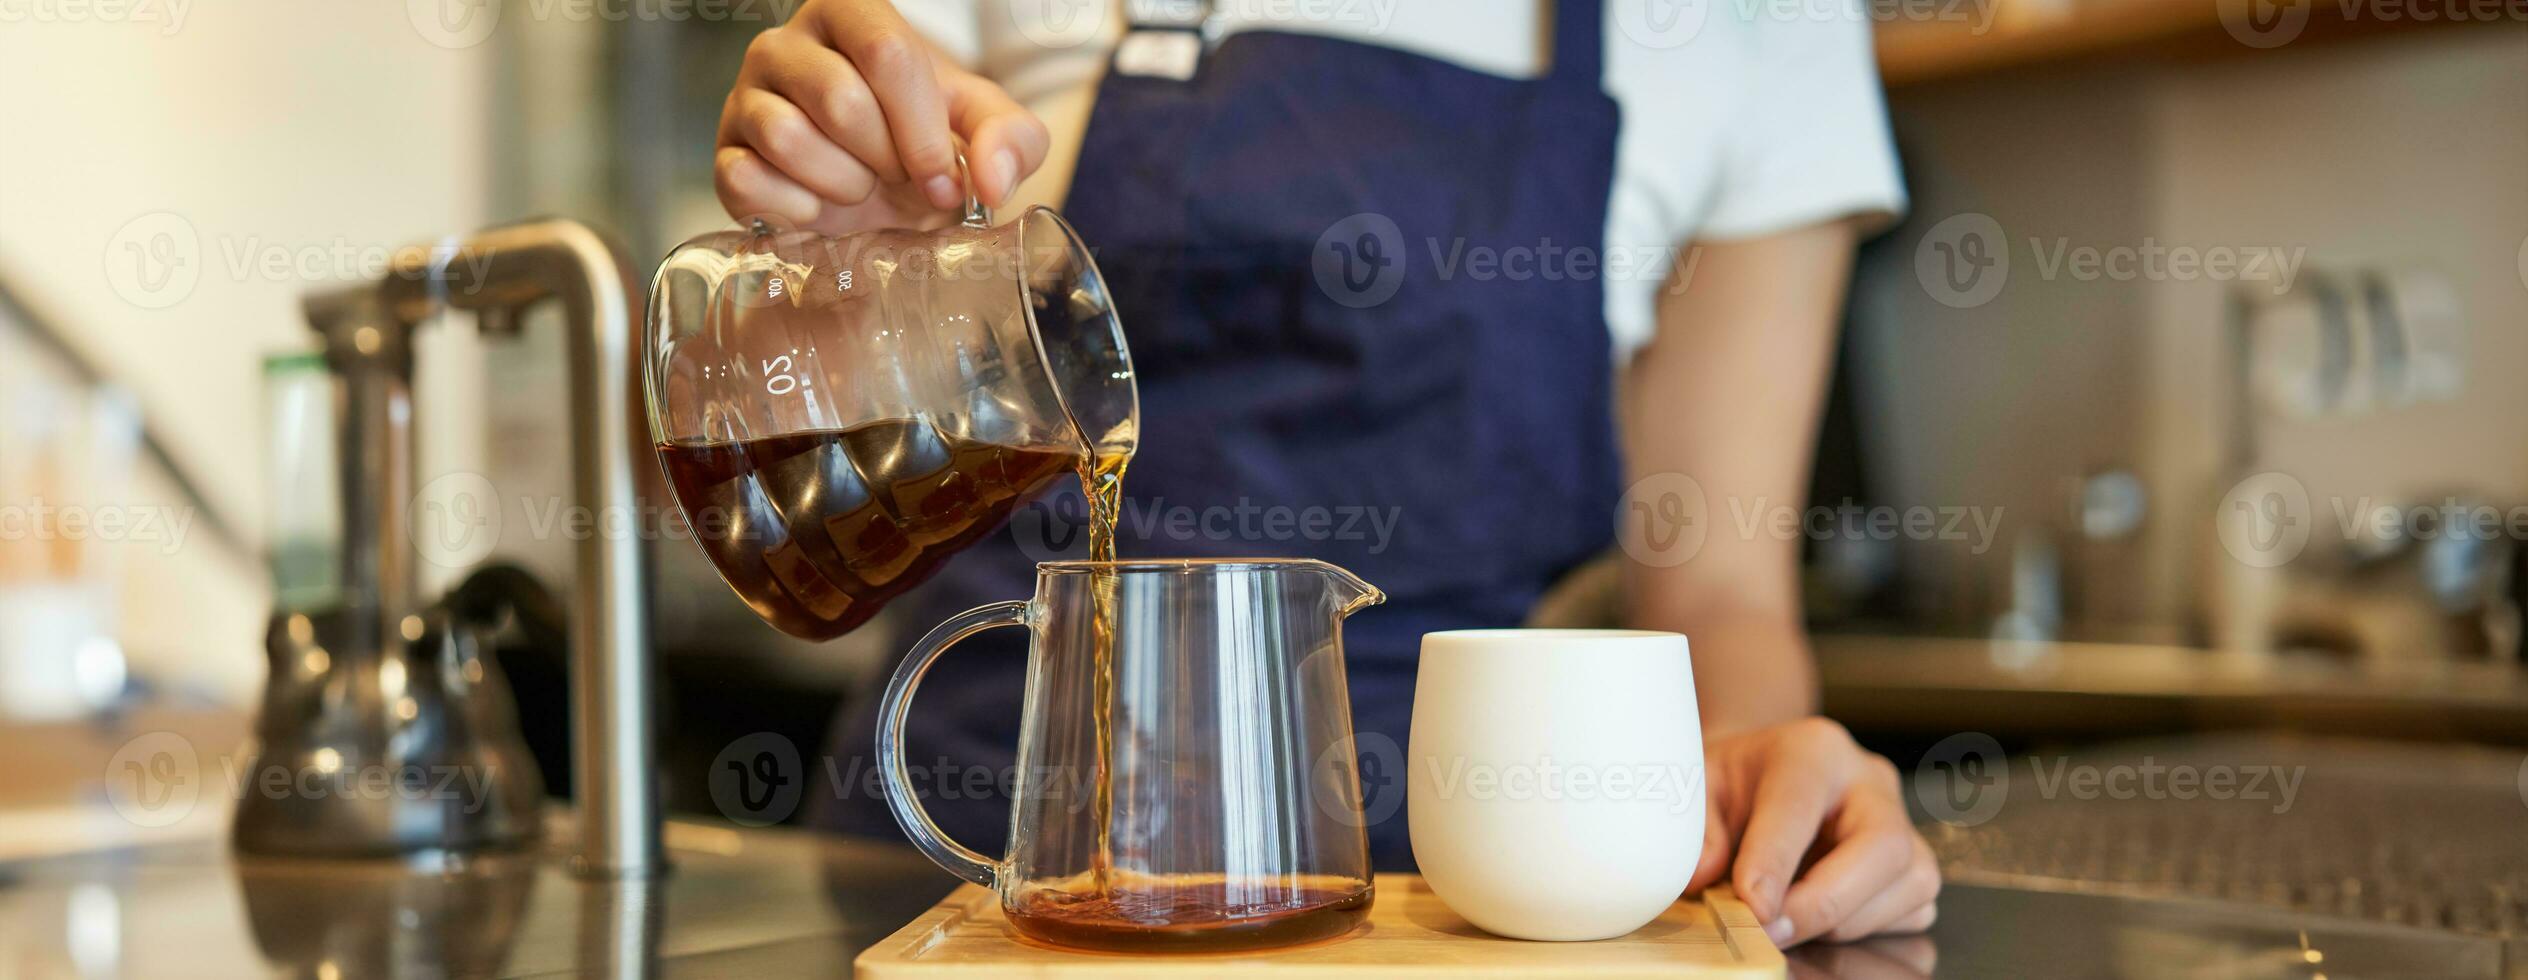 Close up of glass jar and a cup standing on cafe counter, barista pouring filter coffee and preparing order photo